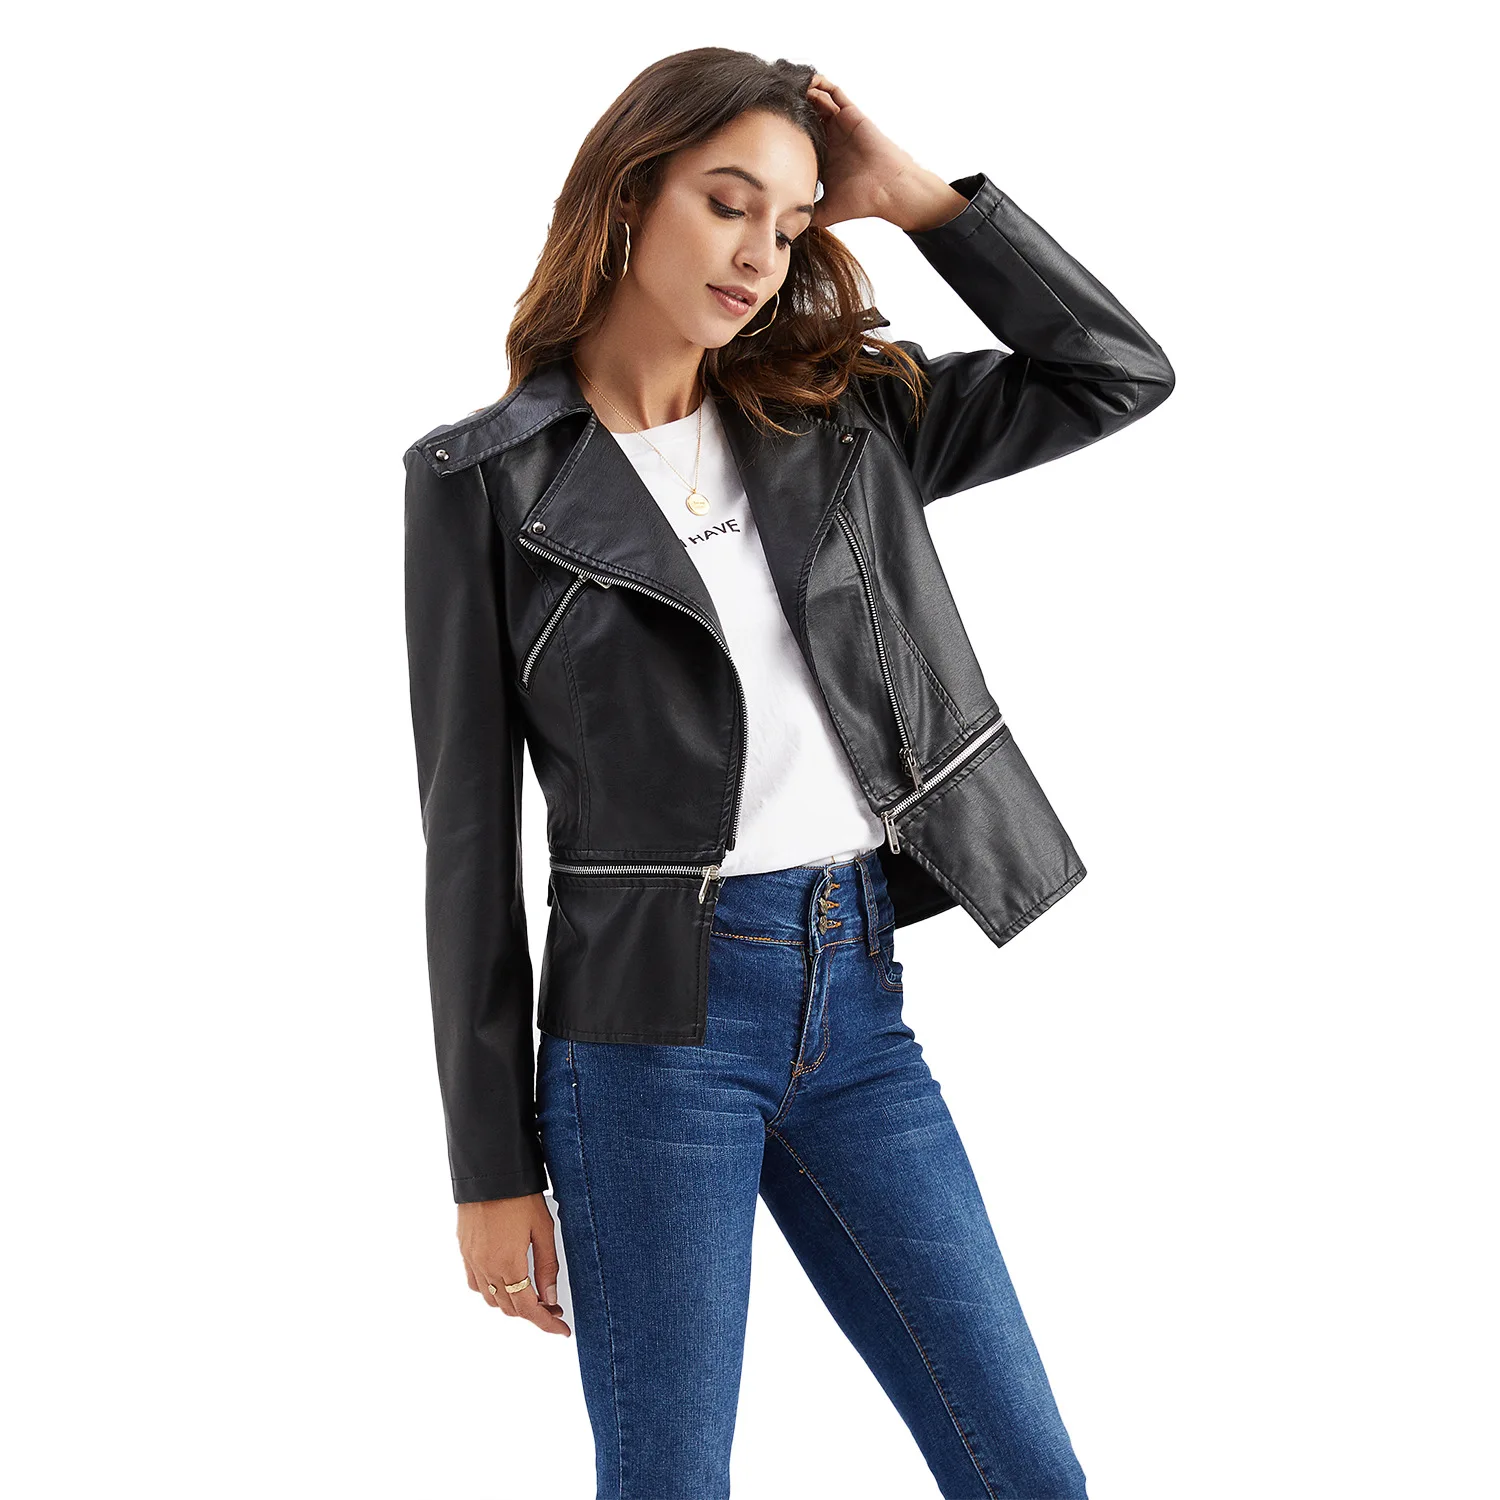 Women's Leisure Hem Detachable Leather Jacket, Spring and Autumn Coat, European and American Fashion, High-Quality Lapel Zipper, 2021 men motorcycle leather jacket pocket black zipper lapel slim fit male spring autumn high quality pu coat large size s 5xl